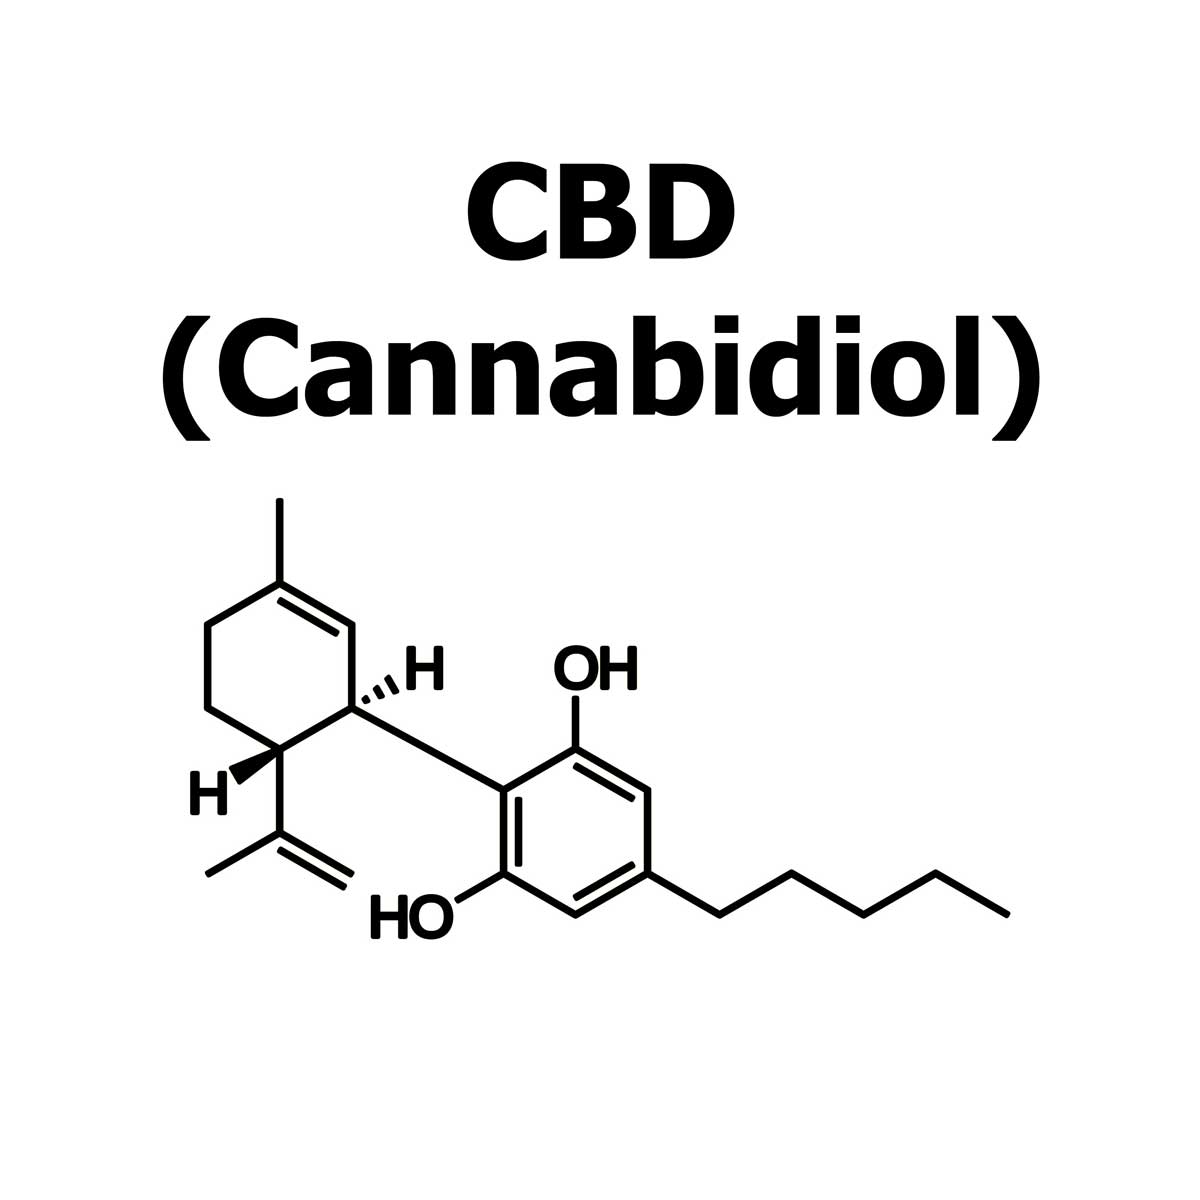 CBD, what conditions should it be used for?